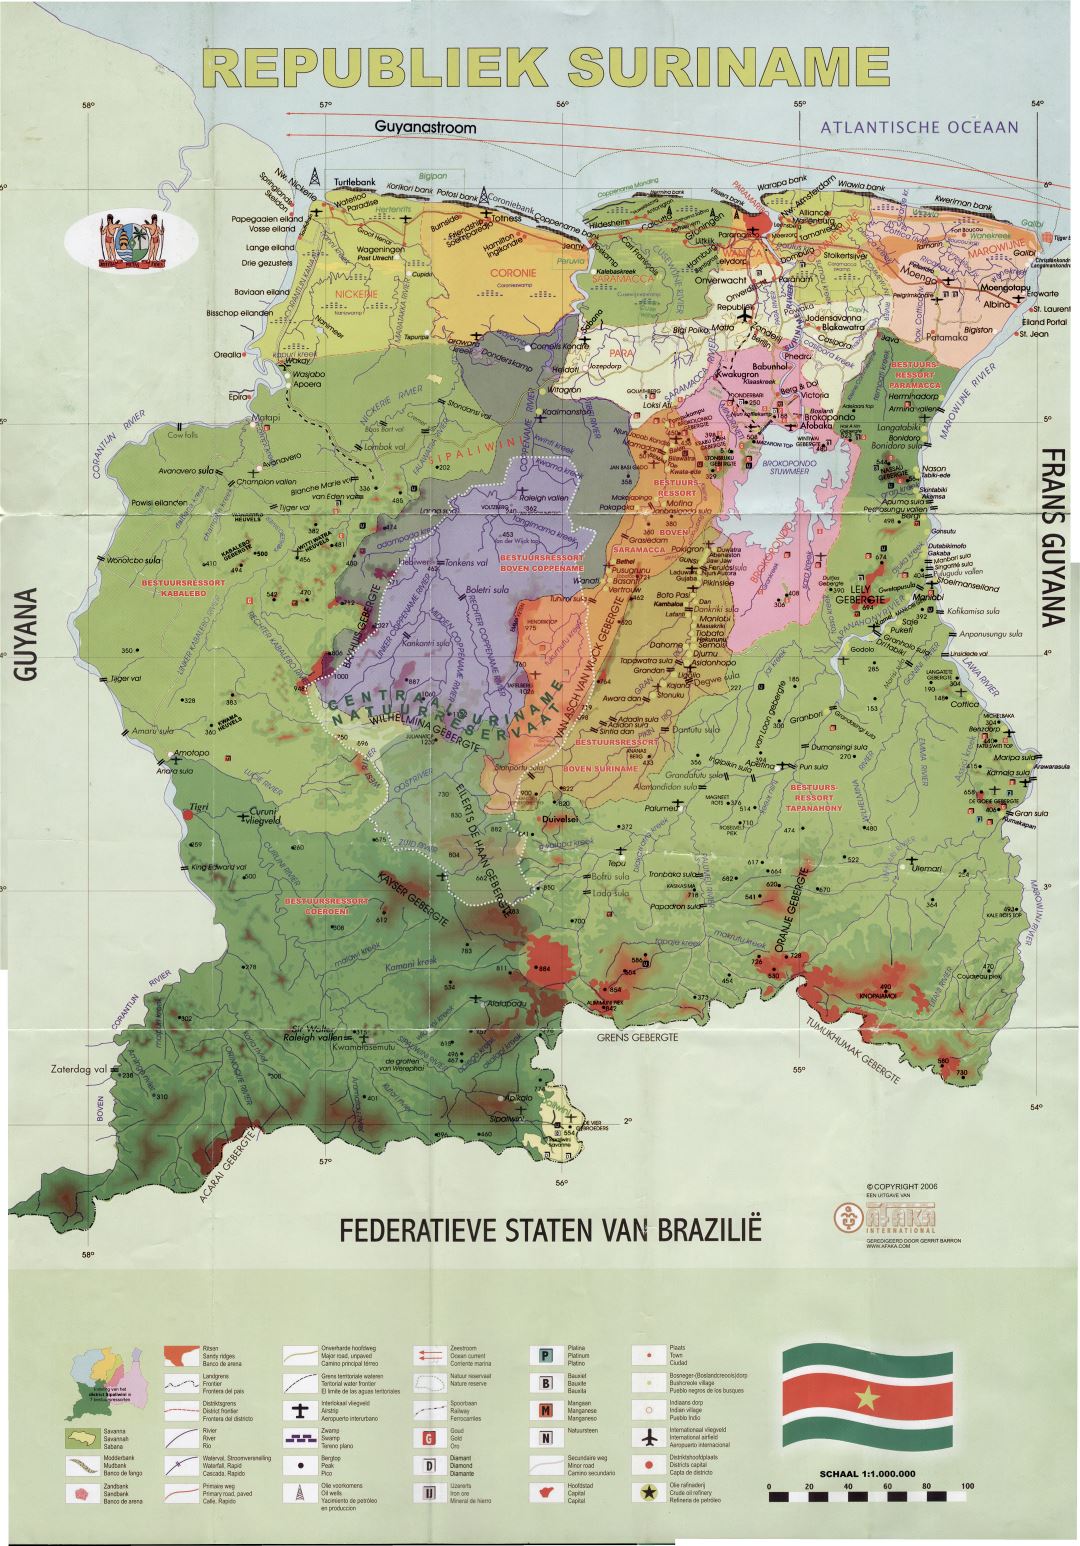 Large scale detailed map of Suriname